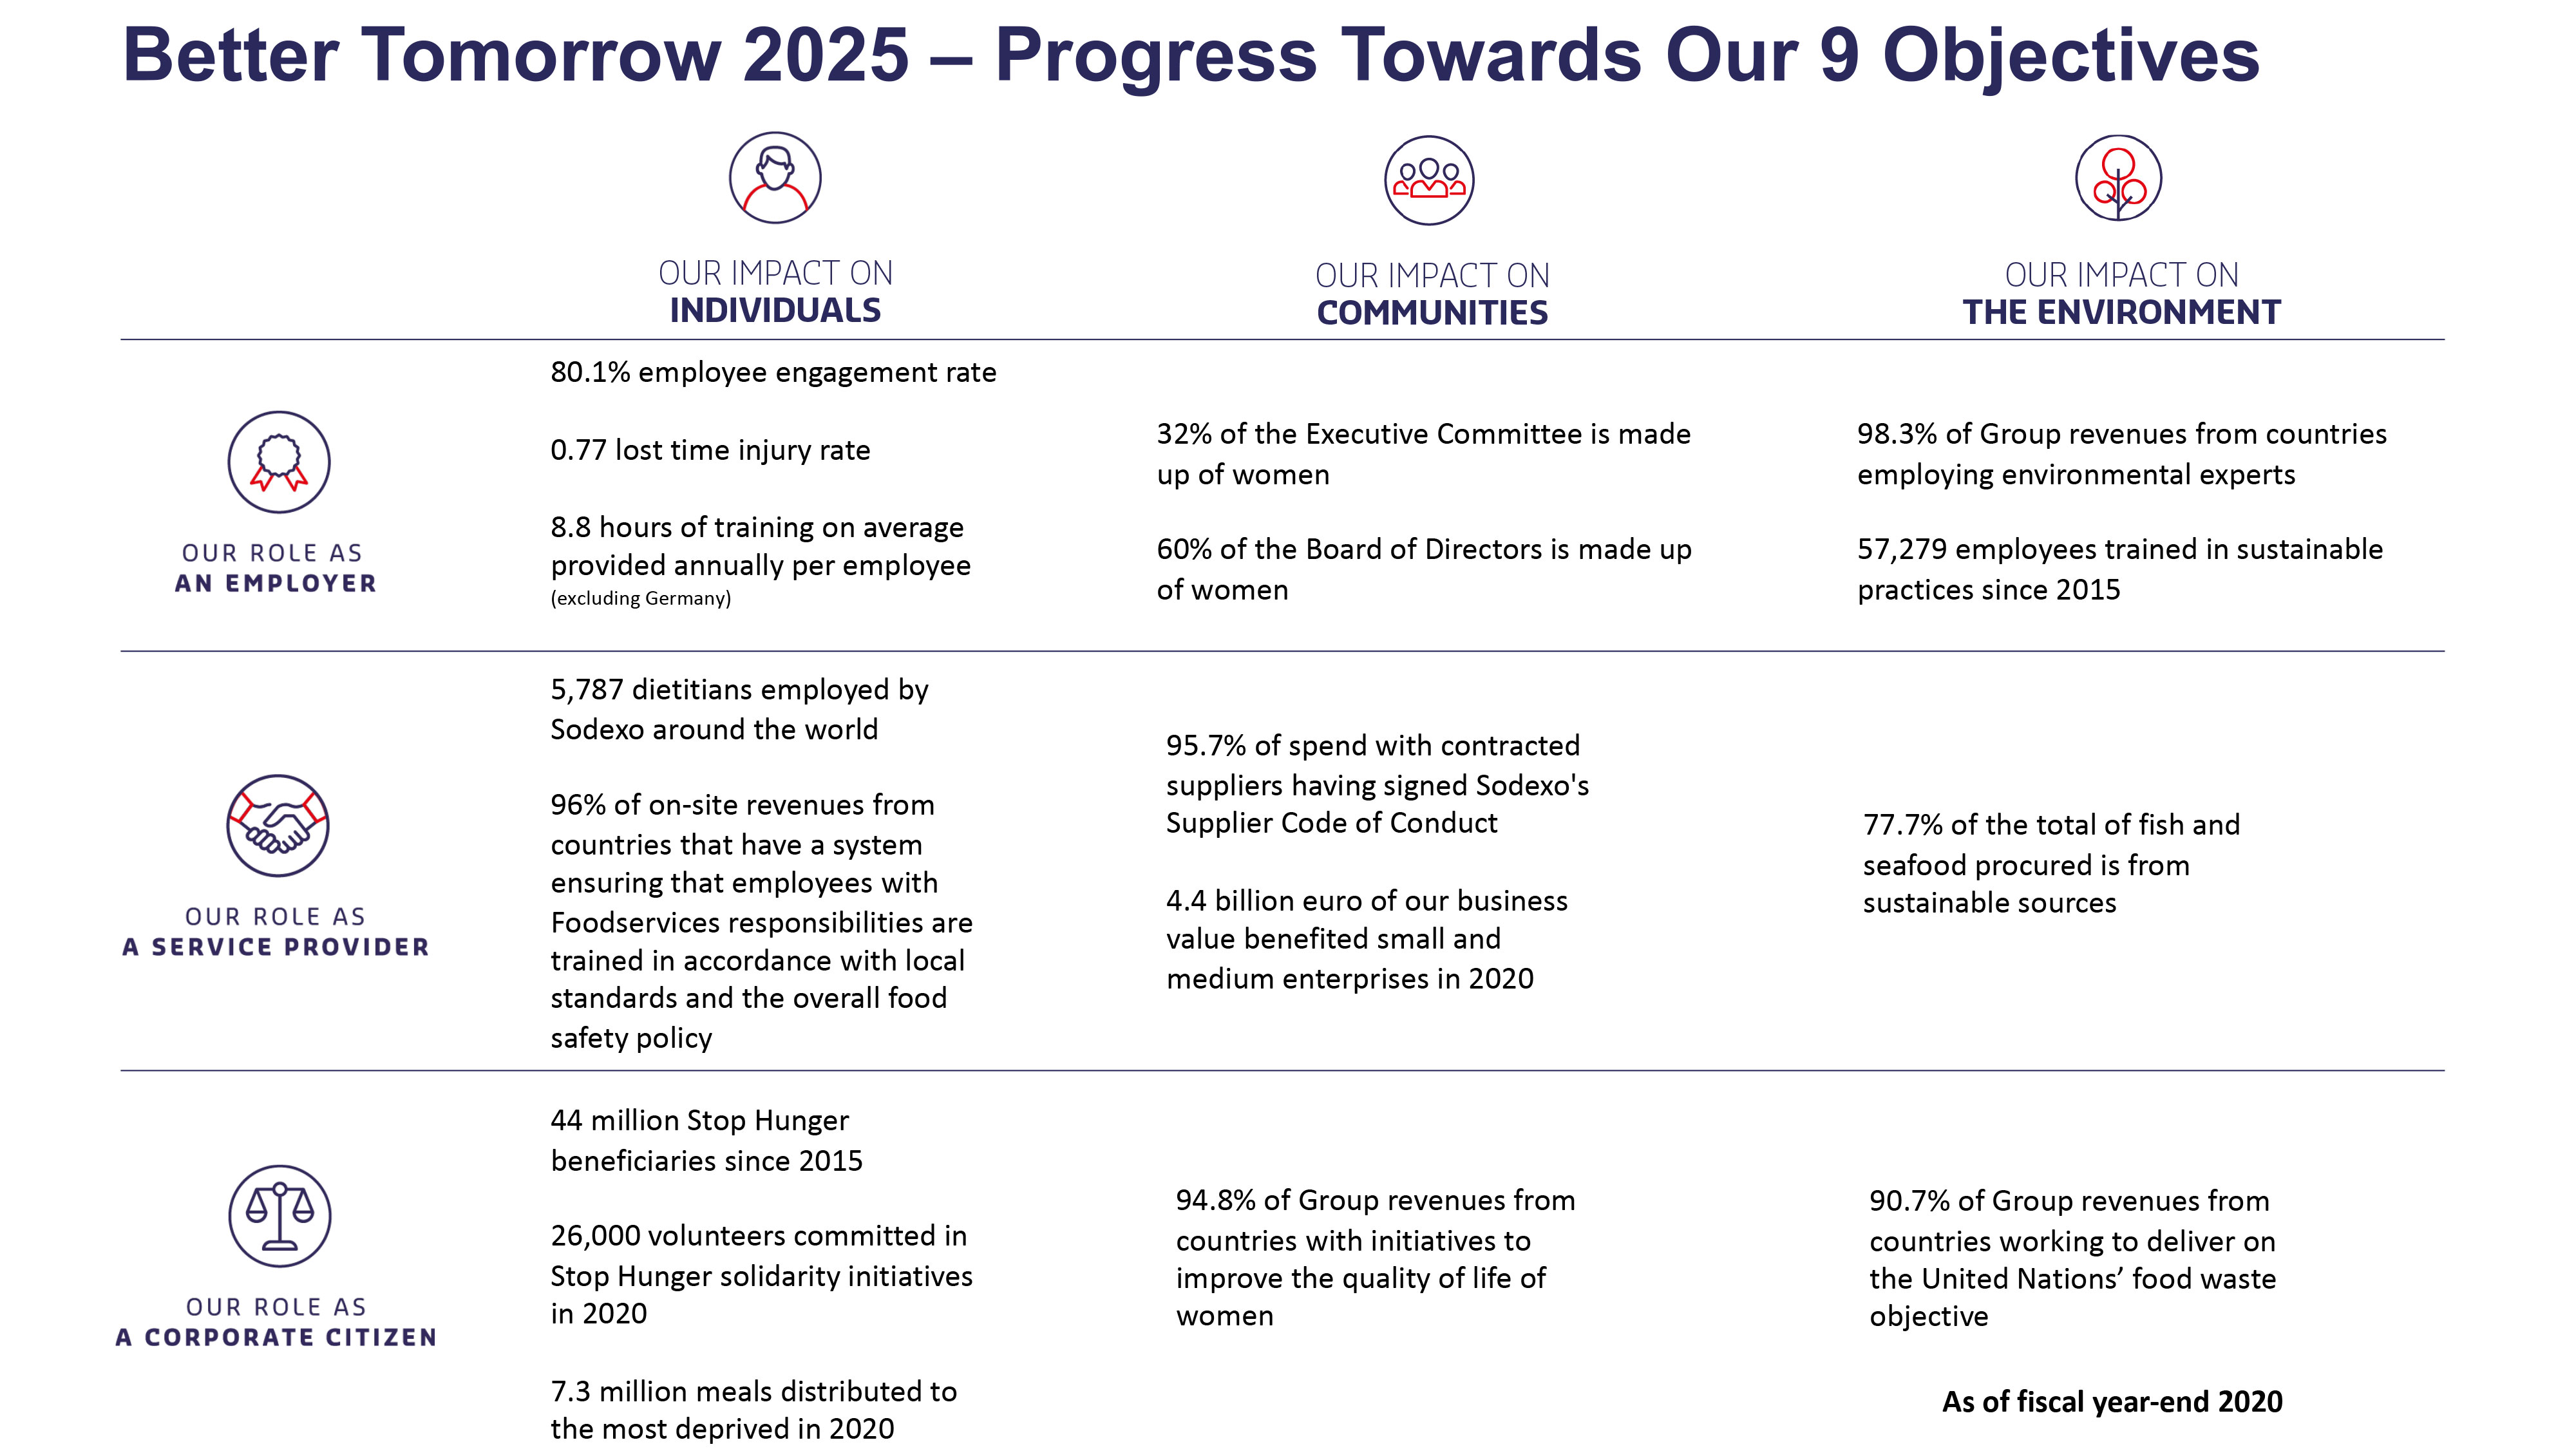 Better Tomorrow 2025 - Our 9 Commitments and Objectives